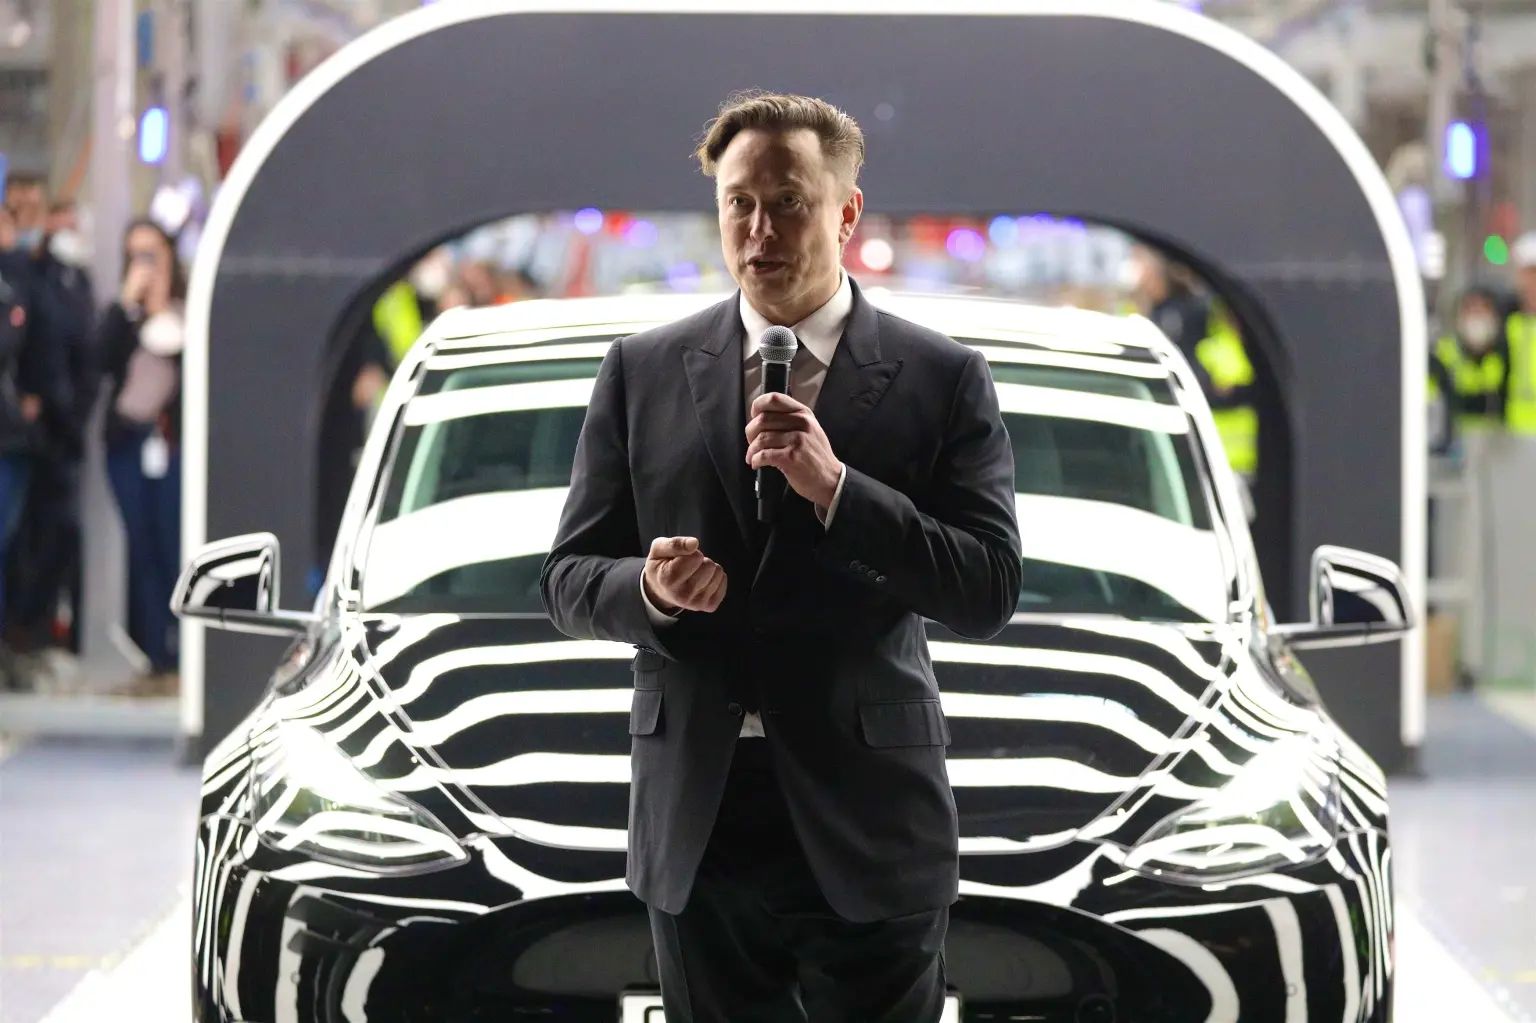 By one estimate, Elon Musk would pay $50 billion under a wealth tax.